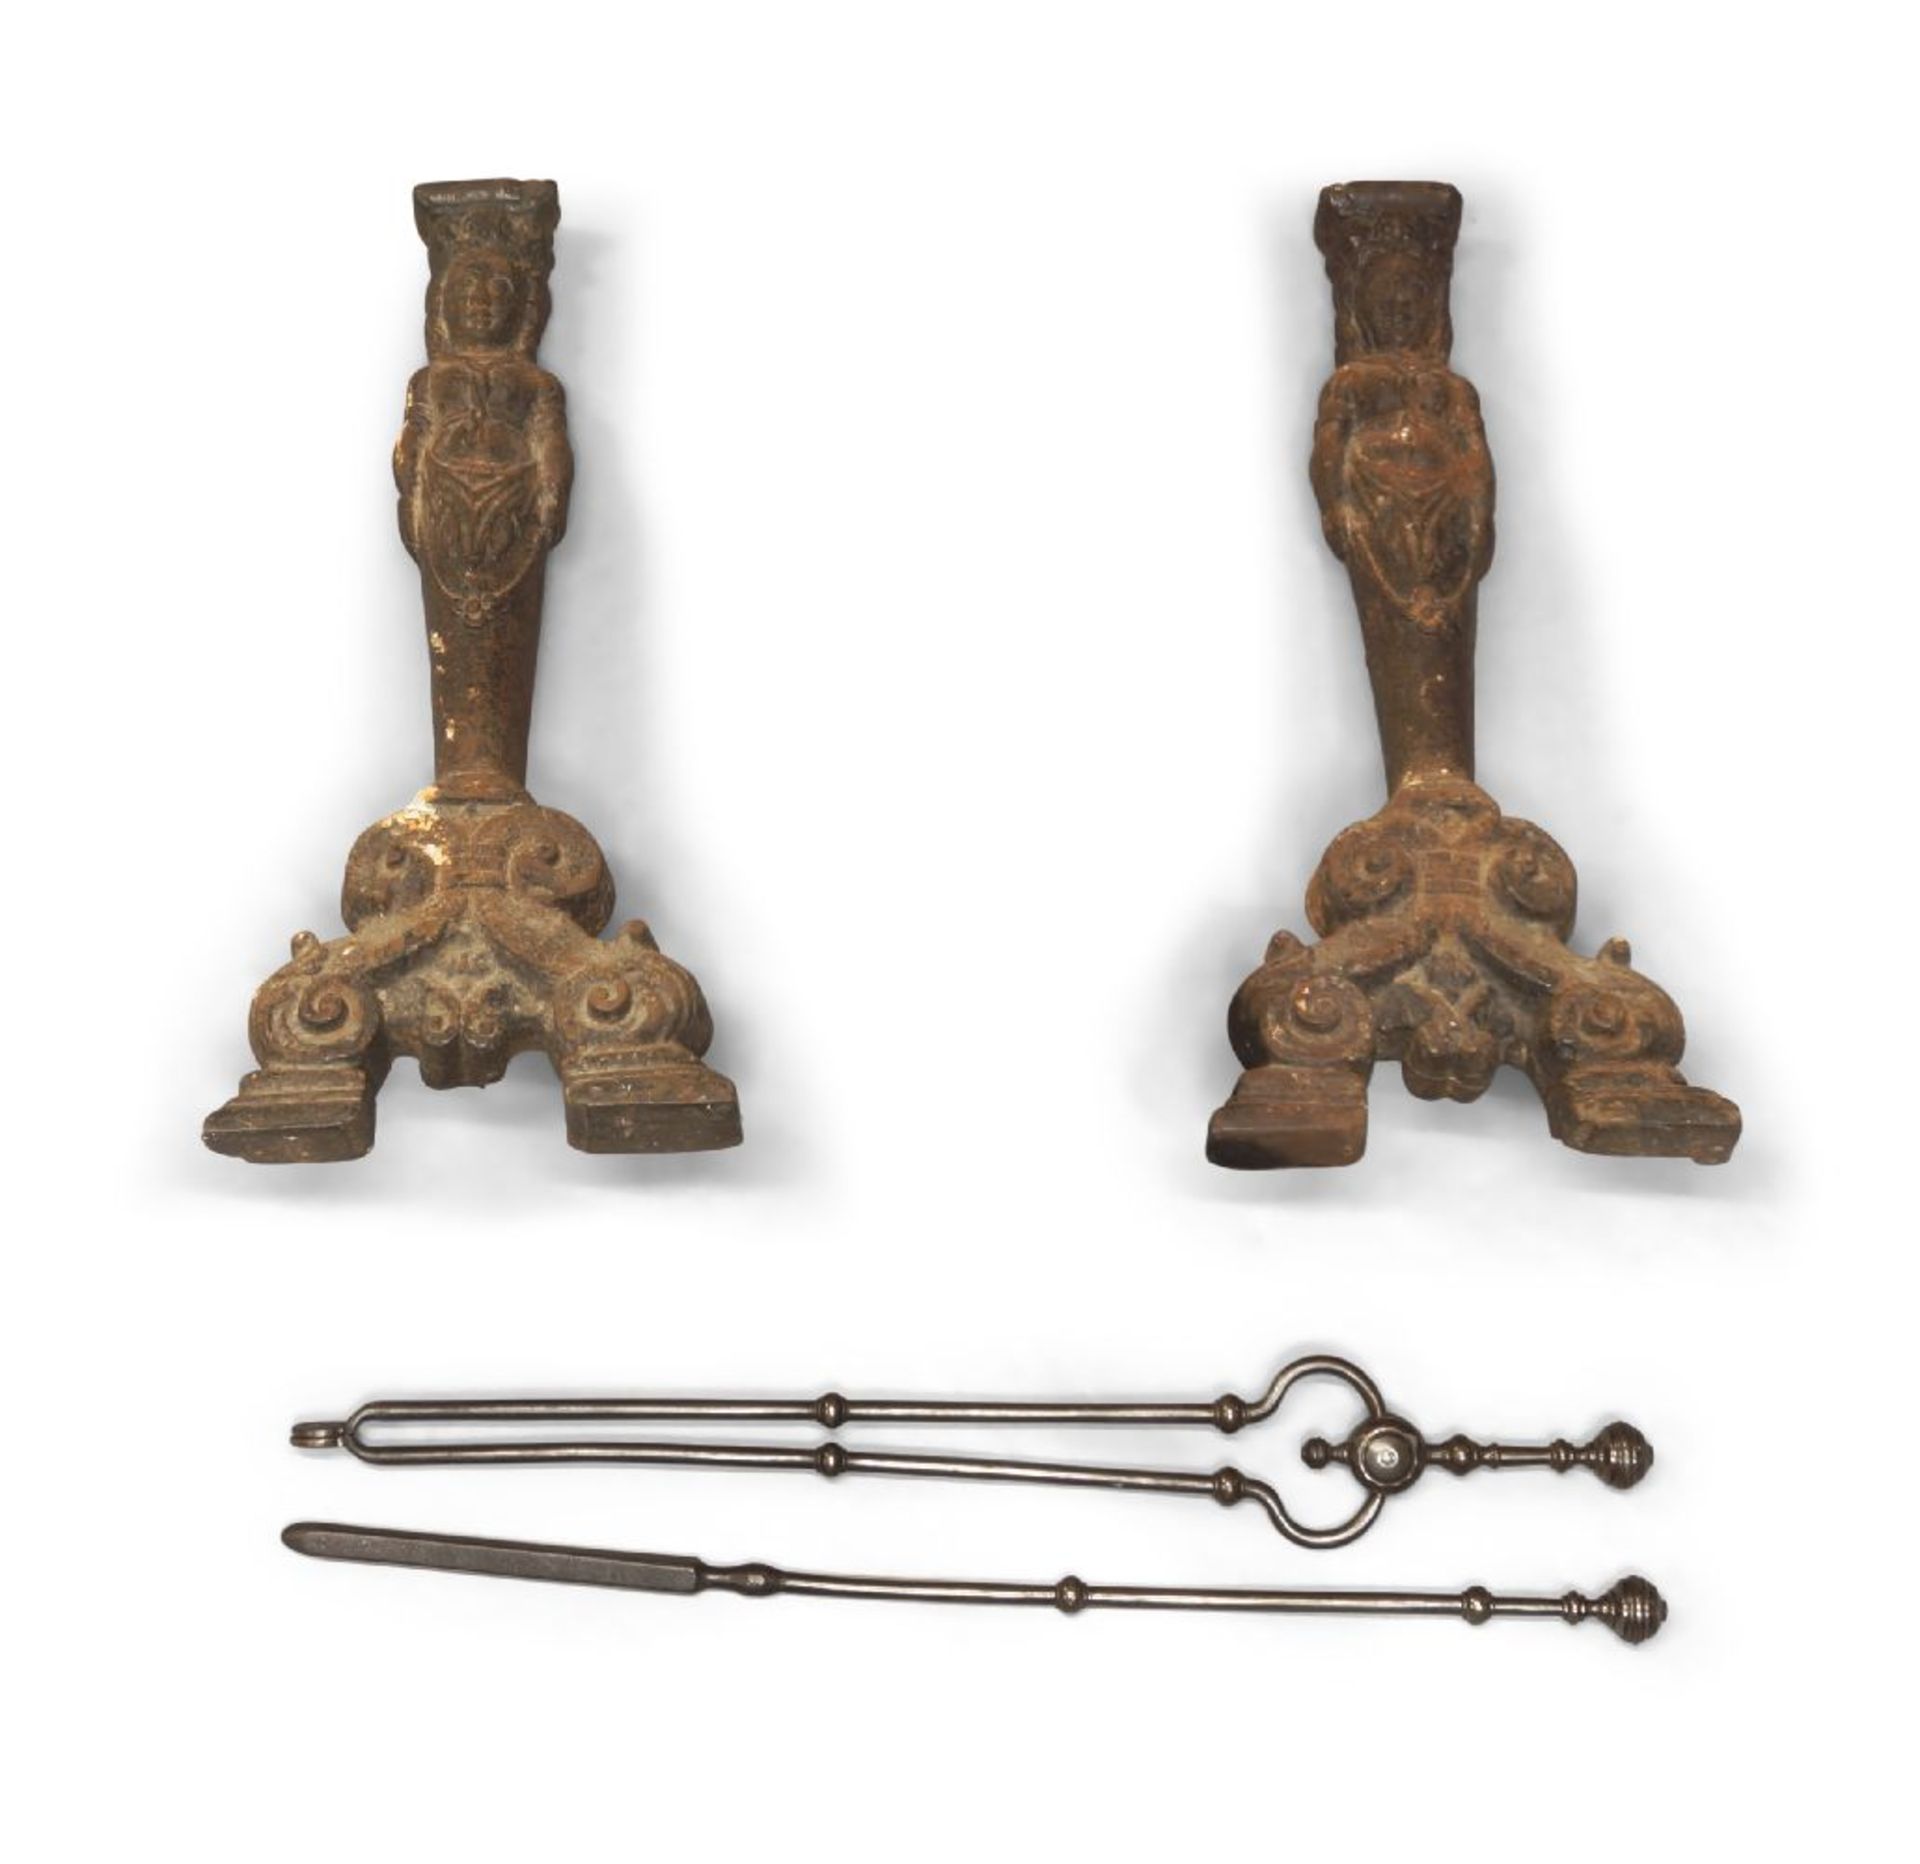 A pair of cast-iron figural andirons of 17th century style, 19th century, the uprights cast as a